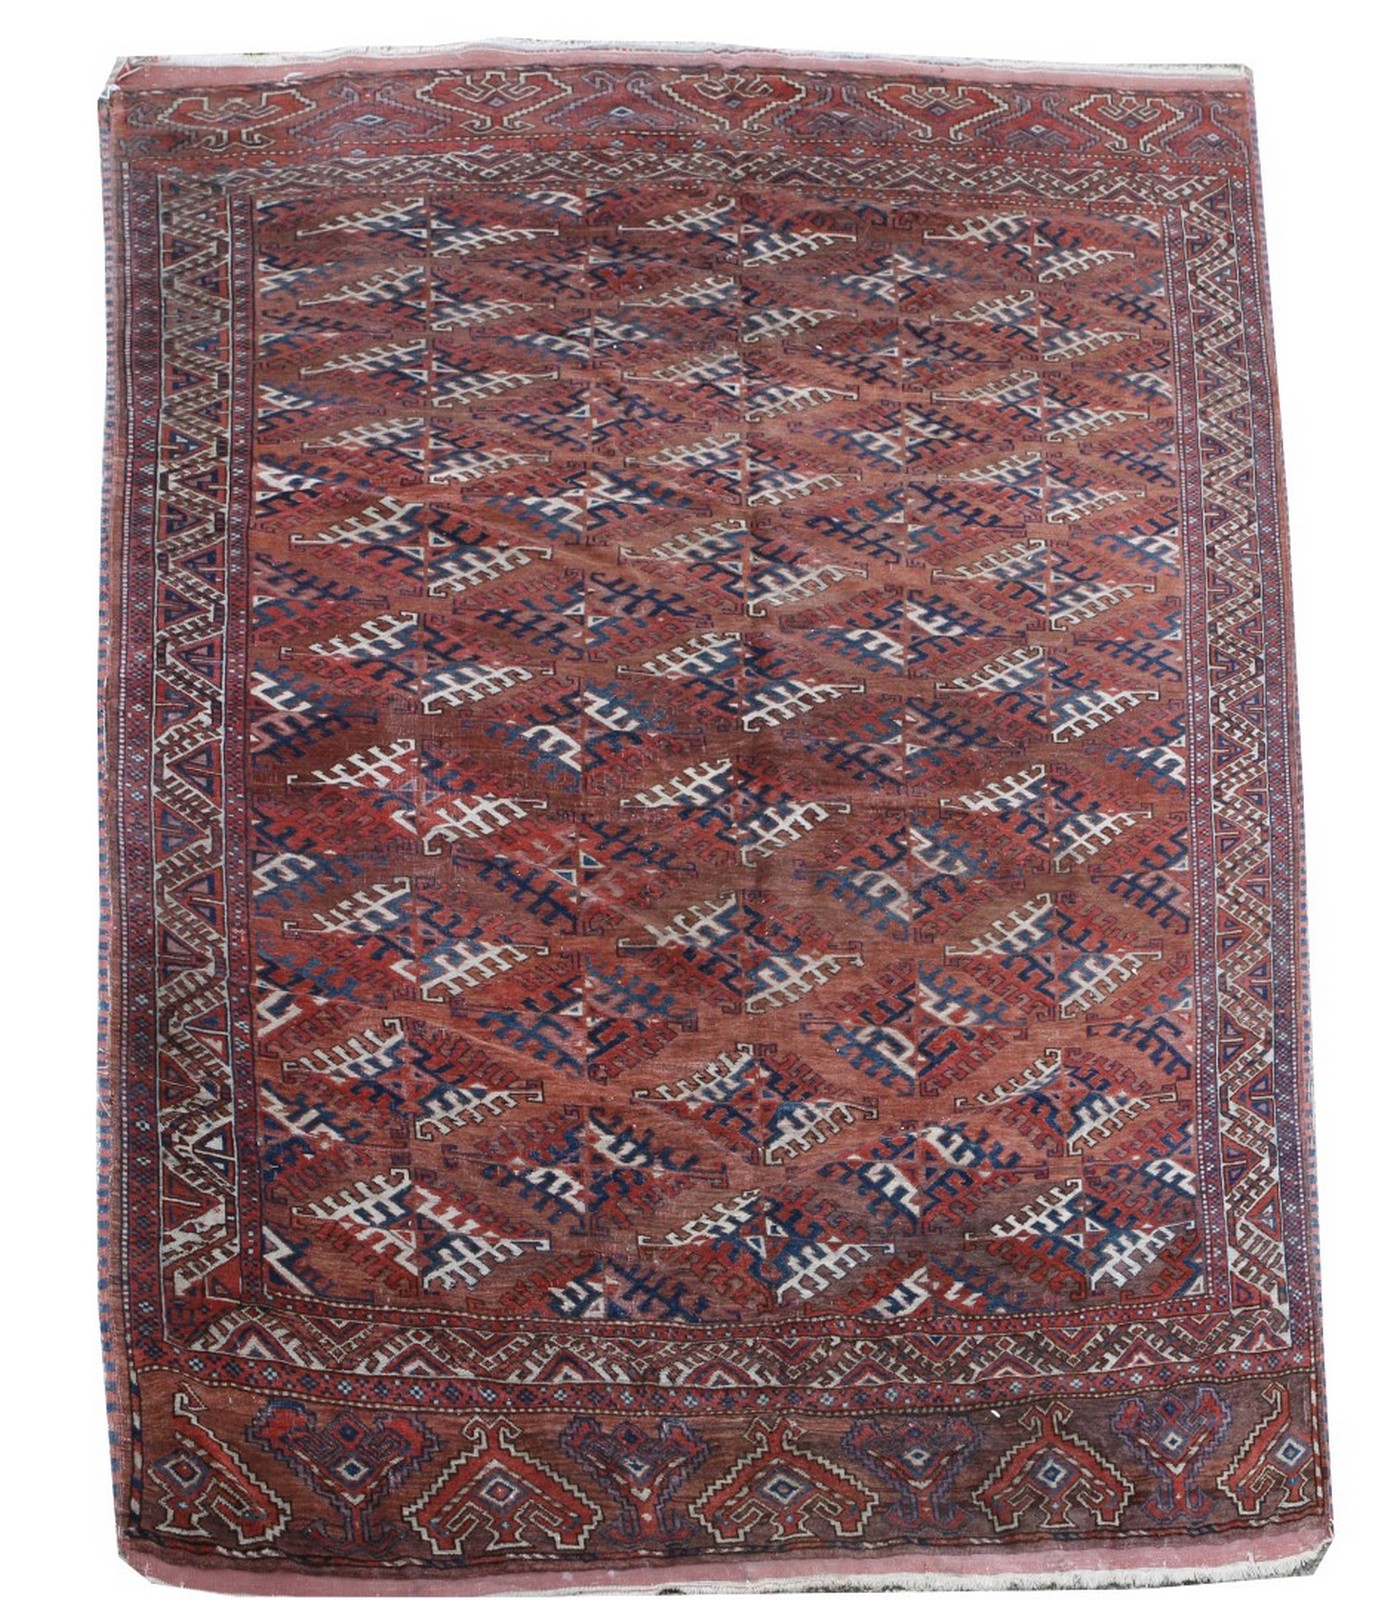 AN ANTIQUE TURKOMAN MAIN CARPET decorated with five rows of geometric latch hook medallions on a